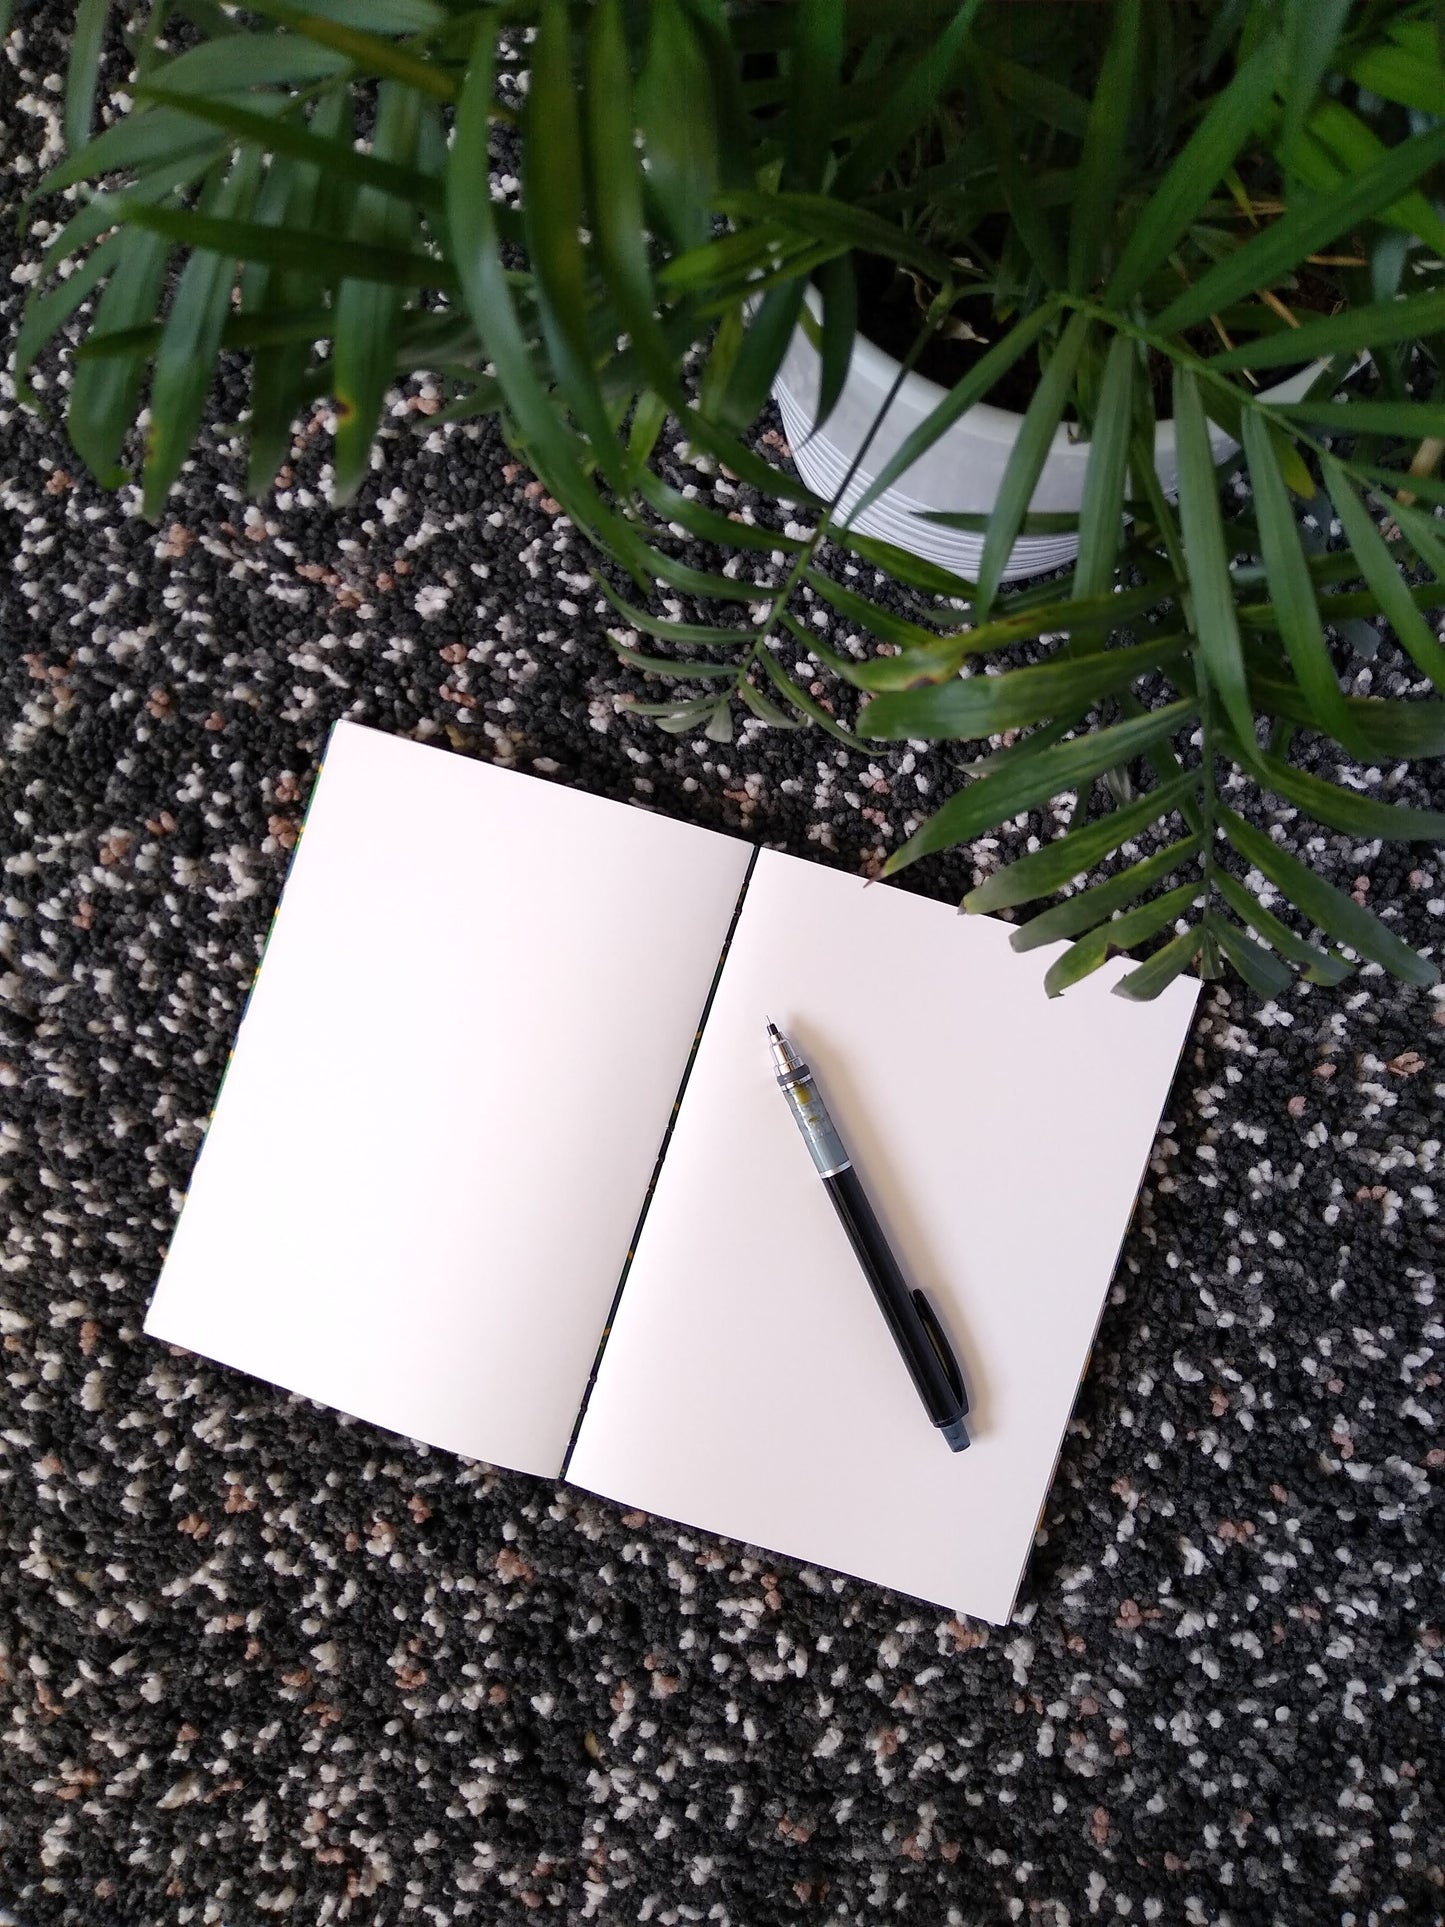 An open journal lays on a black shag carpet next to a potted plant. The journal has a black thread connecting the pages at the spine and a black mechanical pencil rests across the blank white pages.